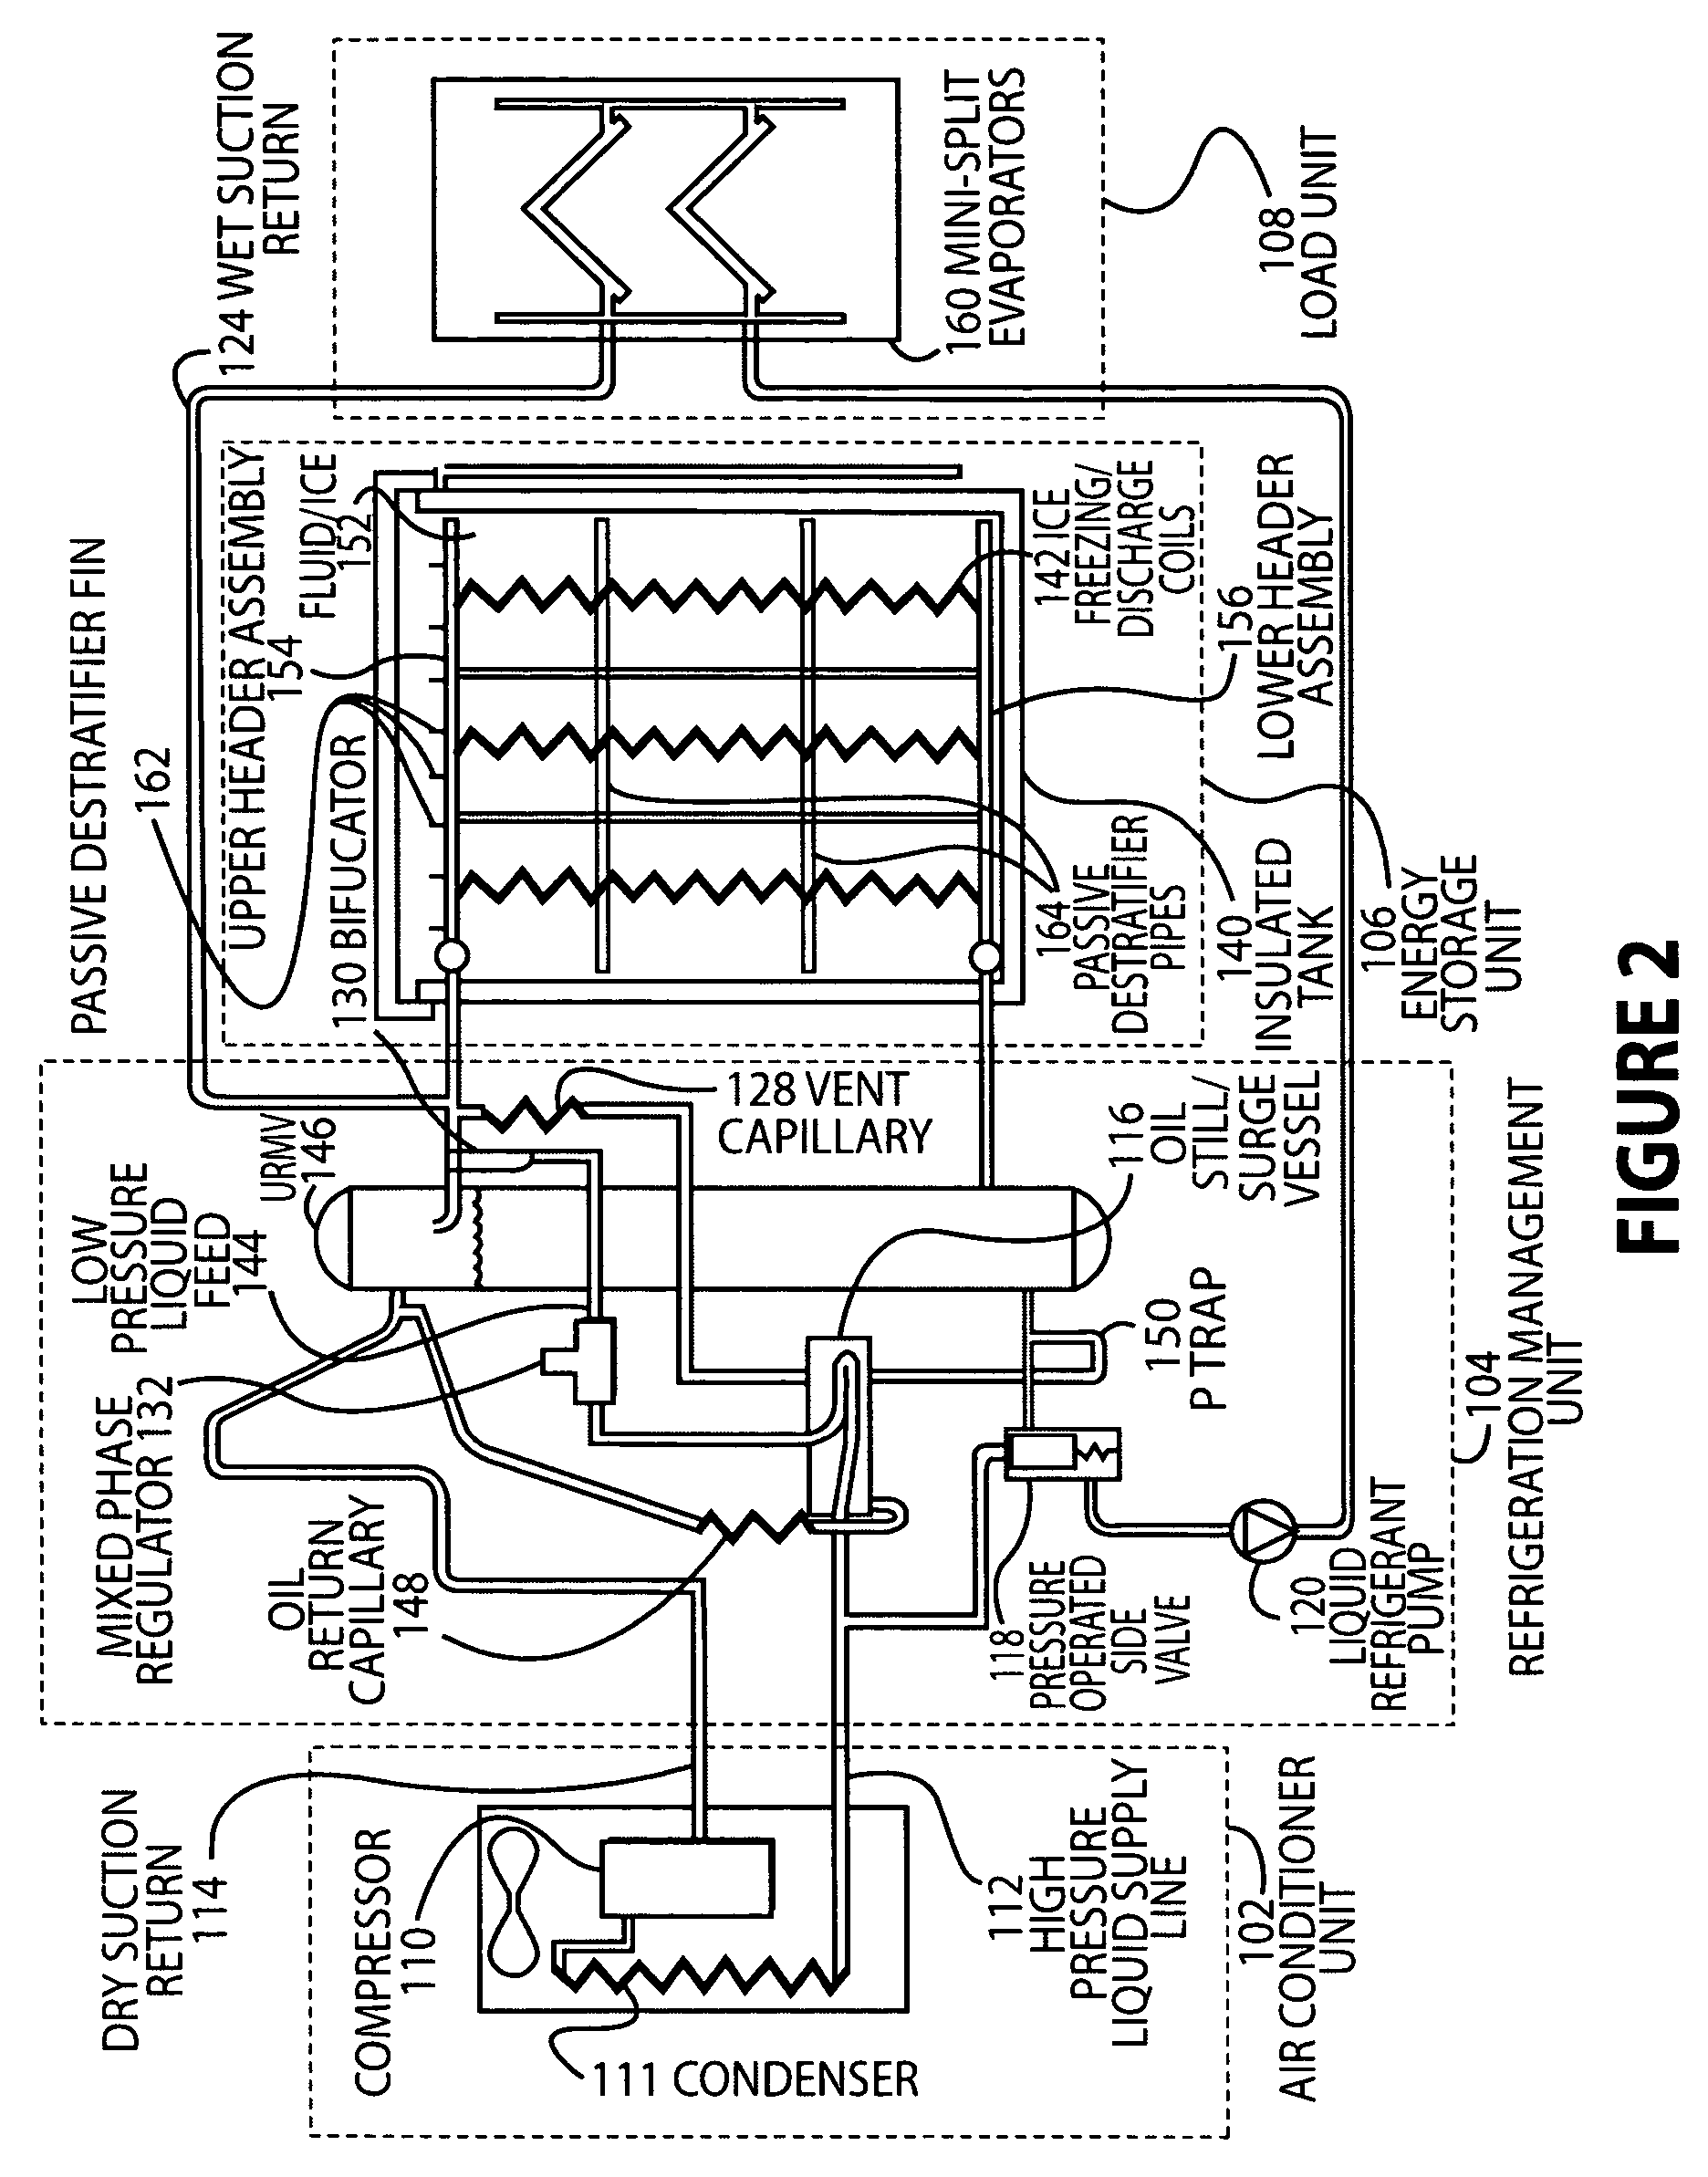 High efficiency refrigerant based energy storage and cooling system